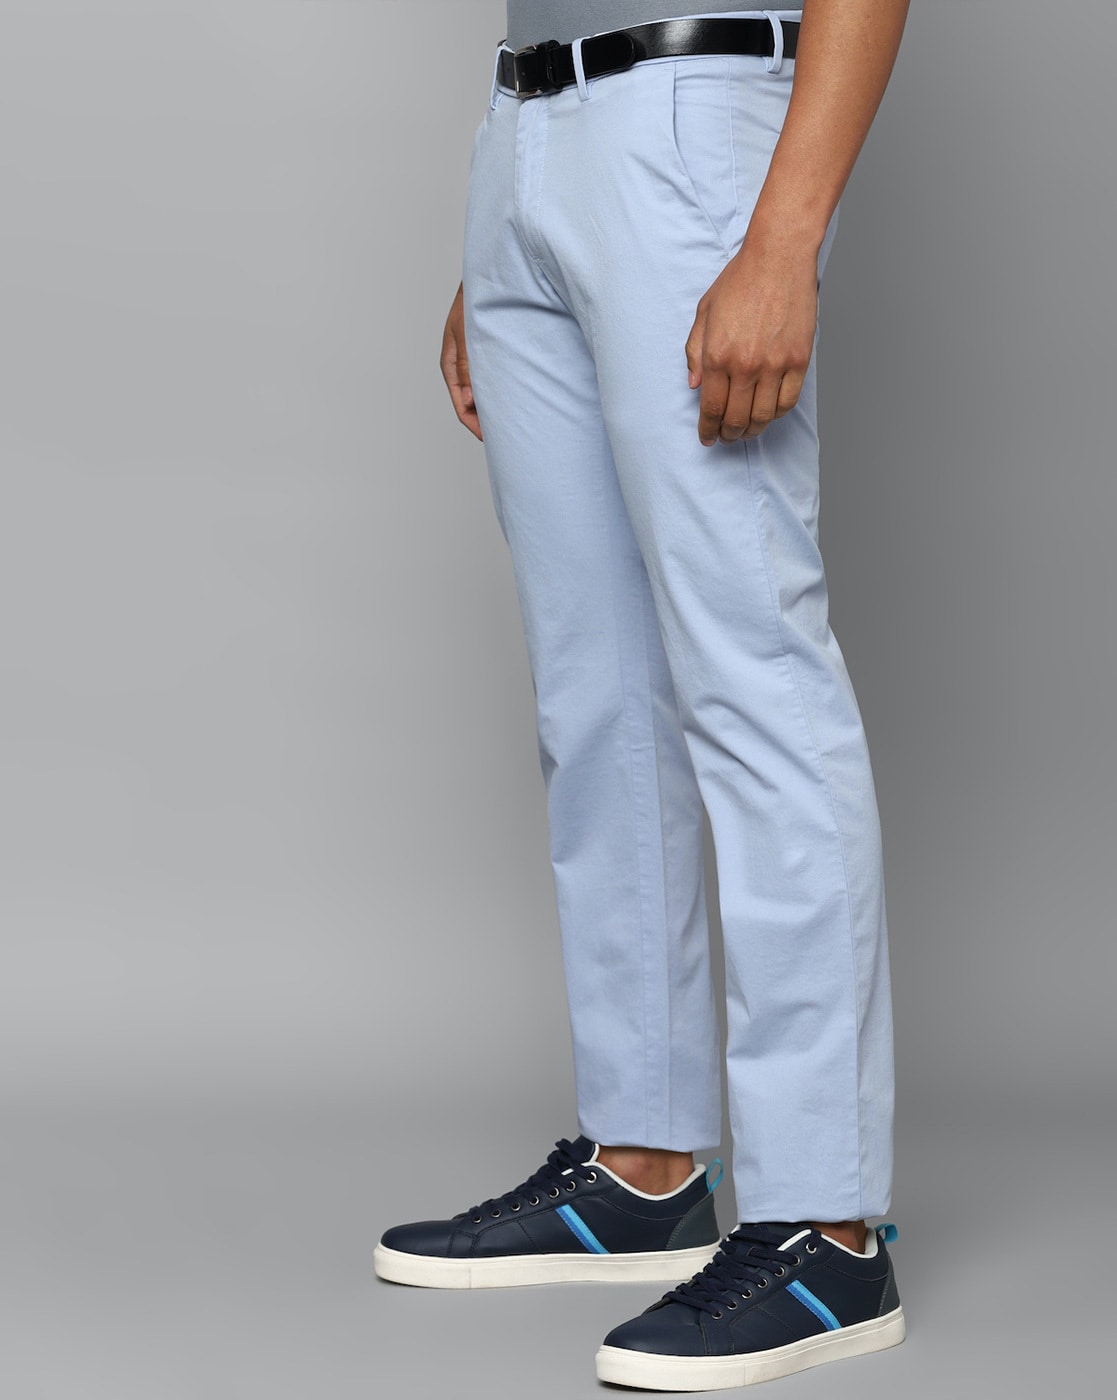 Allen Solly Slim Fit Men White Trousers - Price History